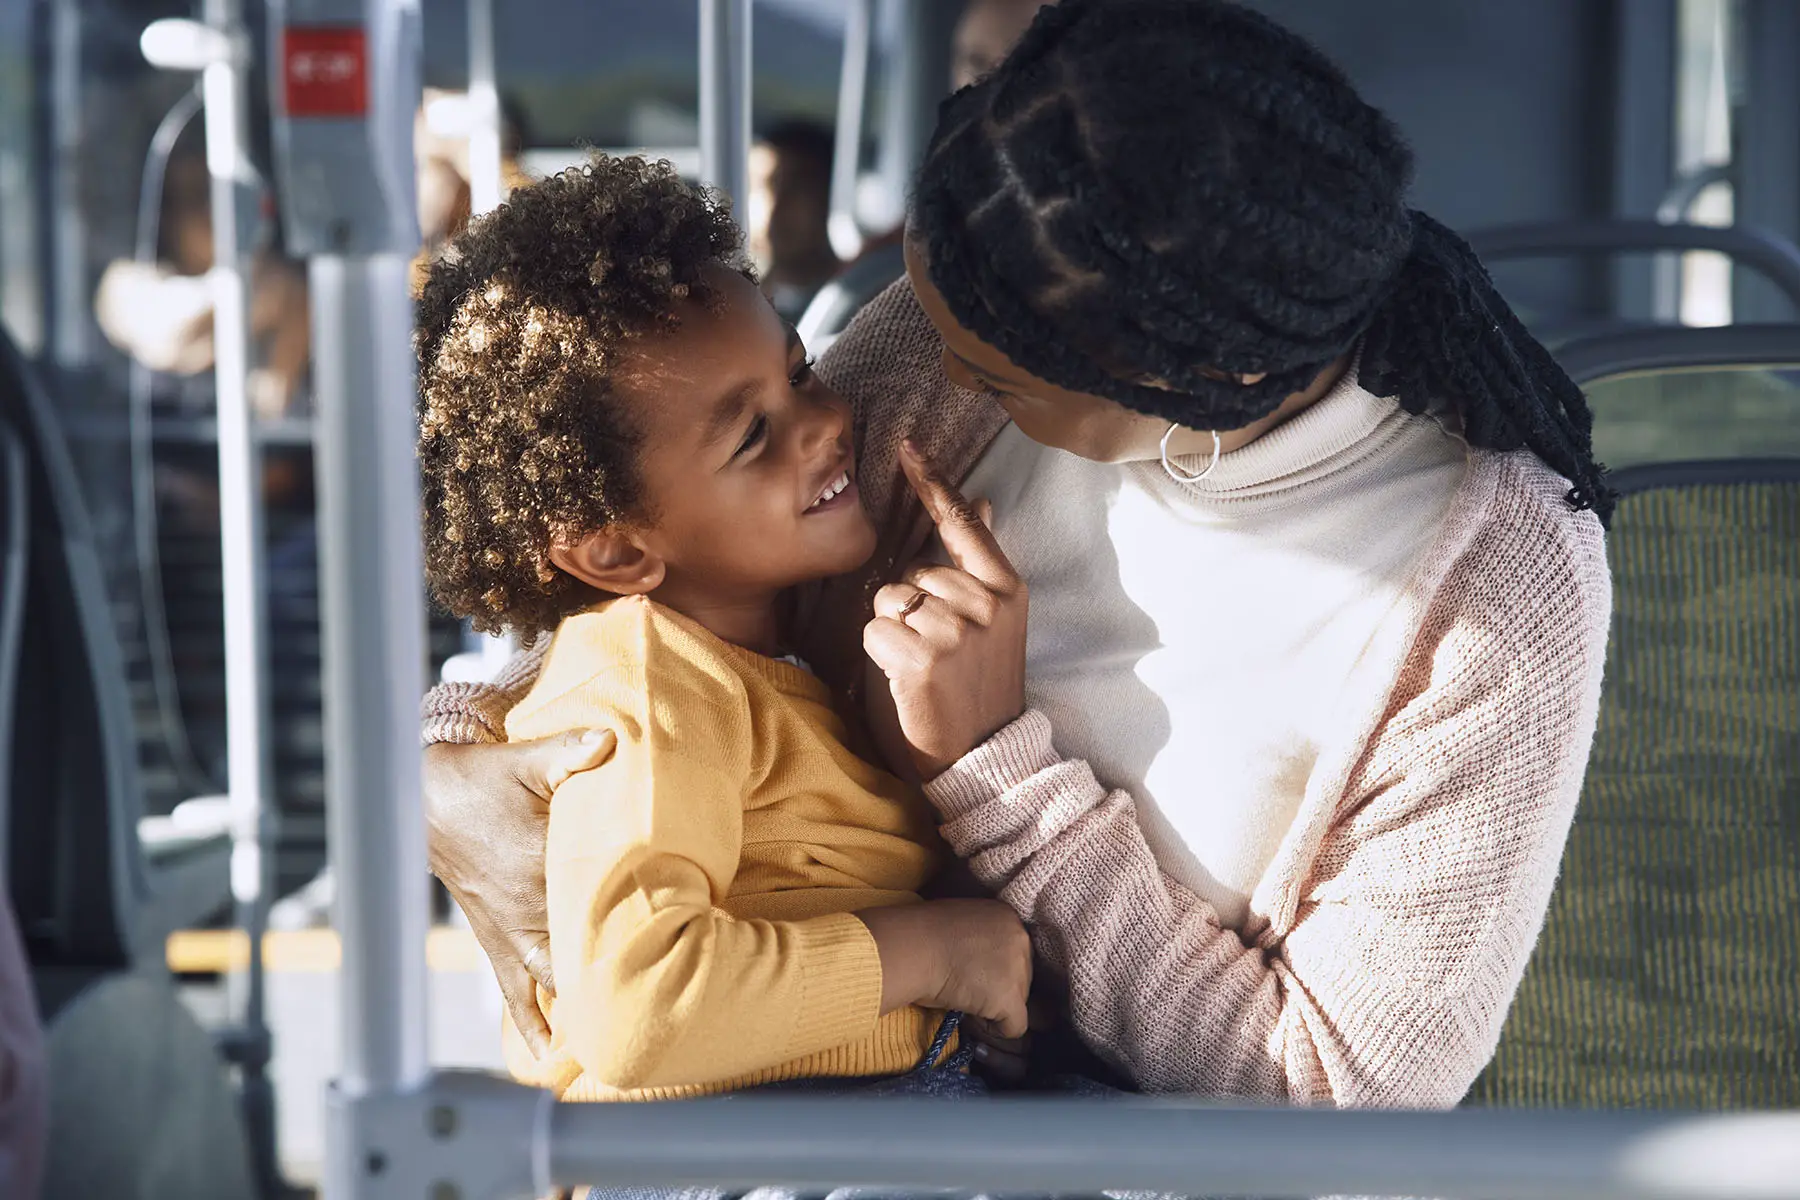 Mother looking at her smiling child, while holding them in a close hug on public bus.